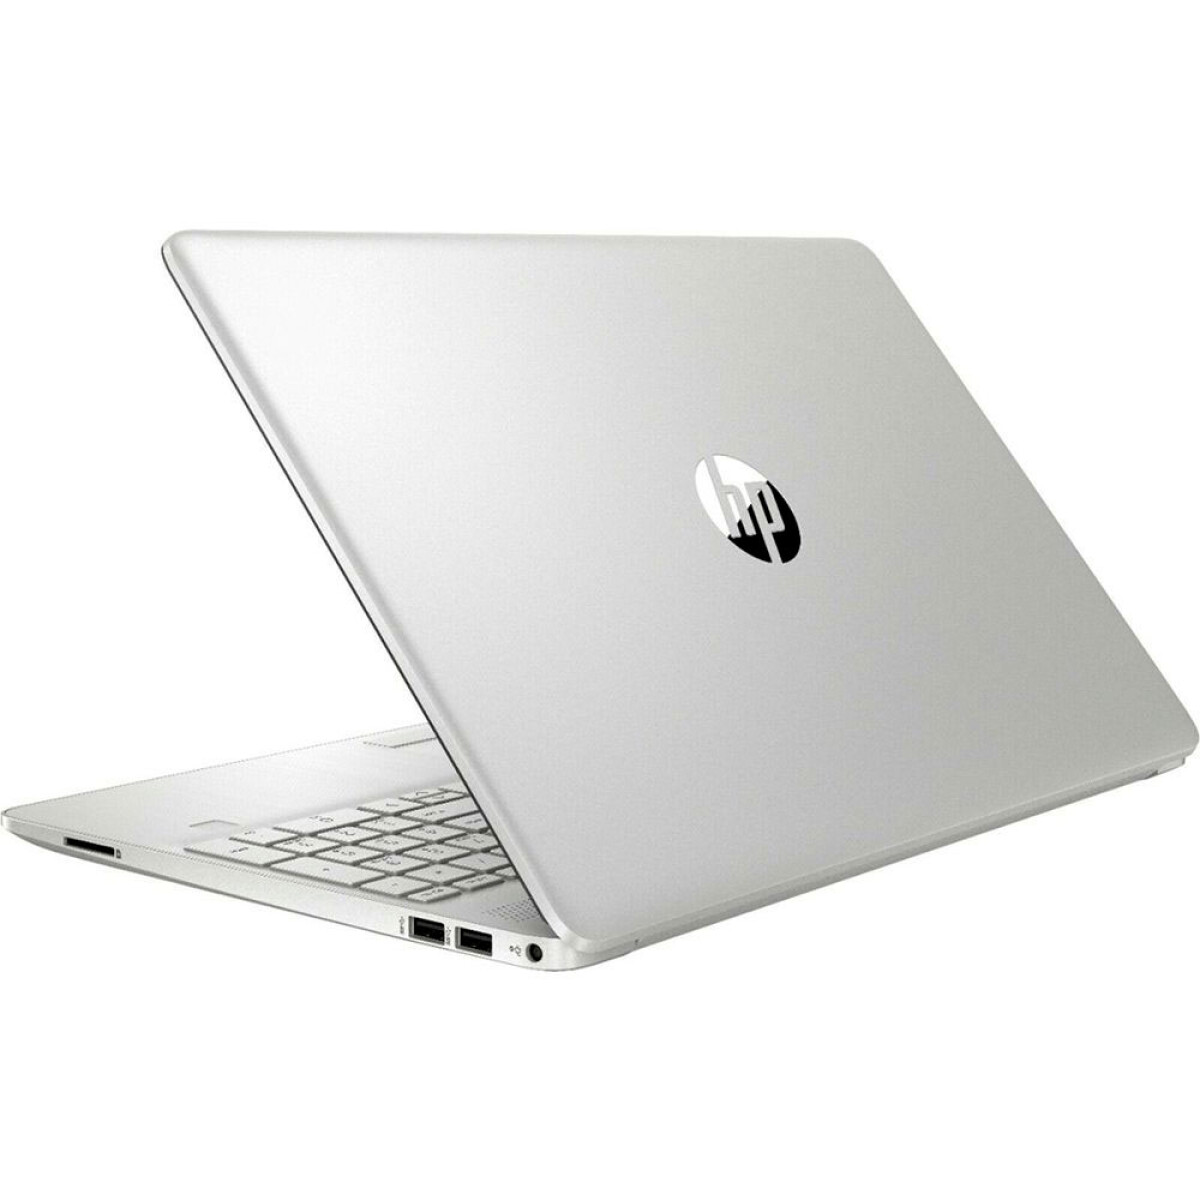 Notebook hp 15-dw3033dx core i3 8gb ram/256gb 15.6' Natural silver